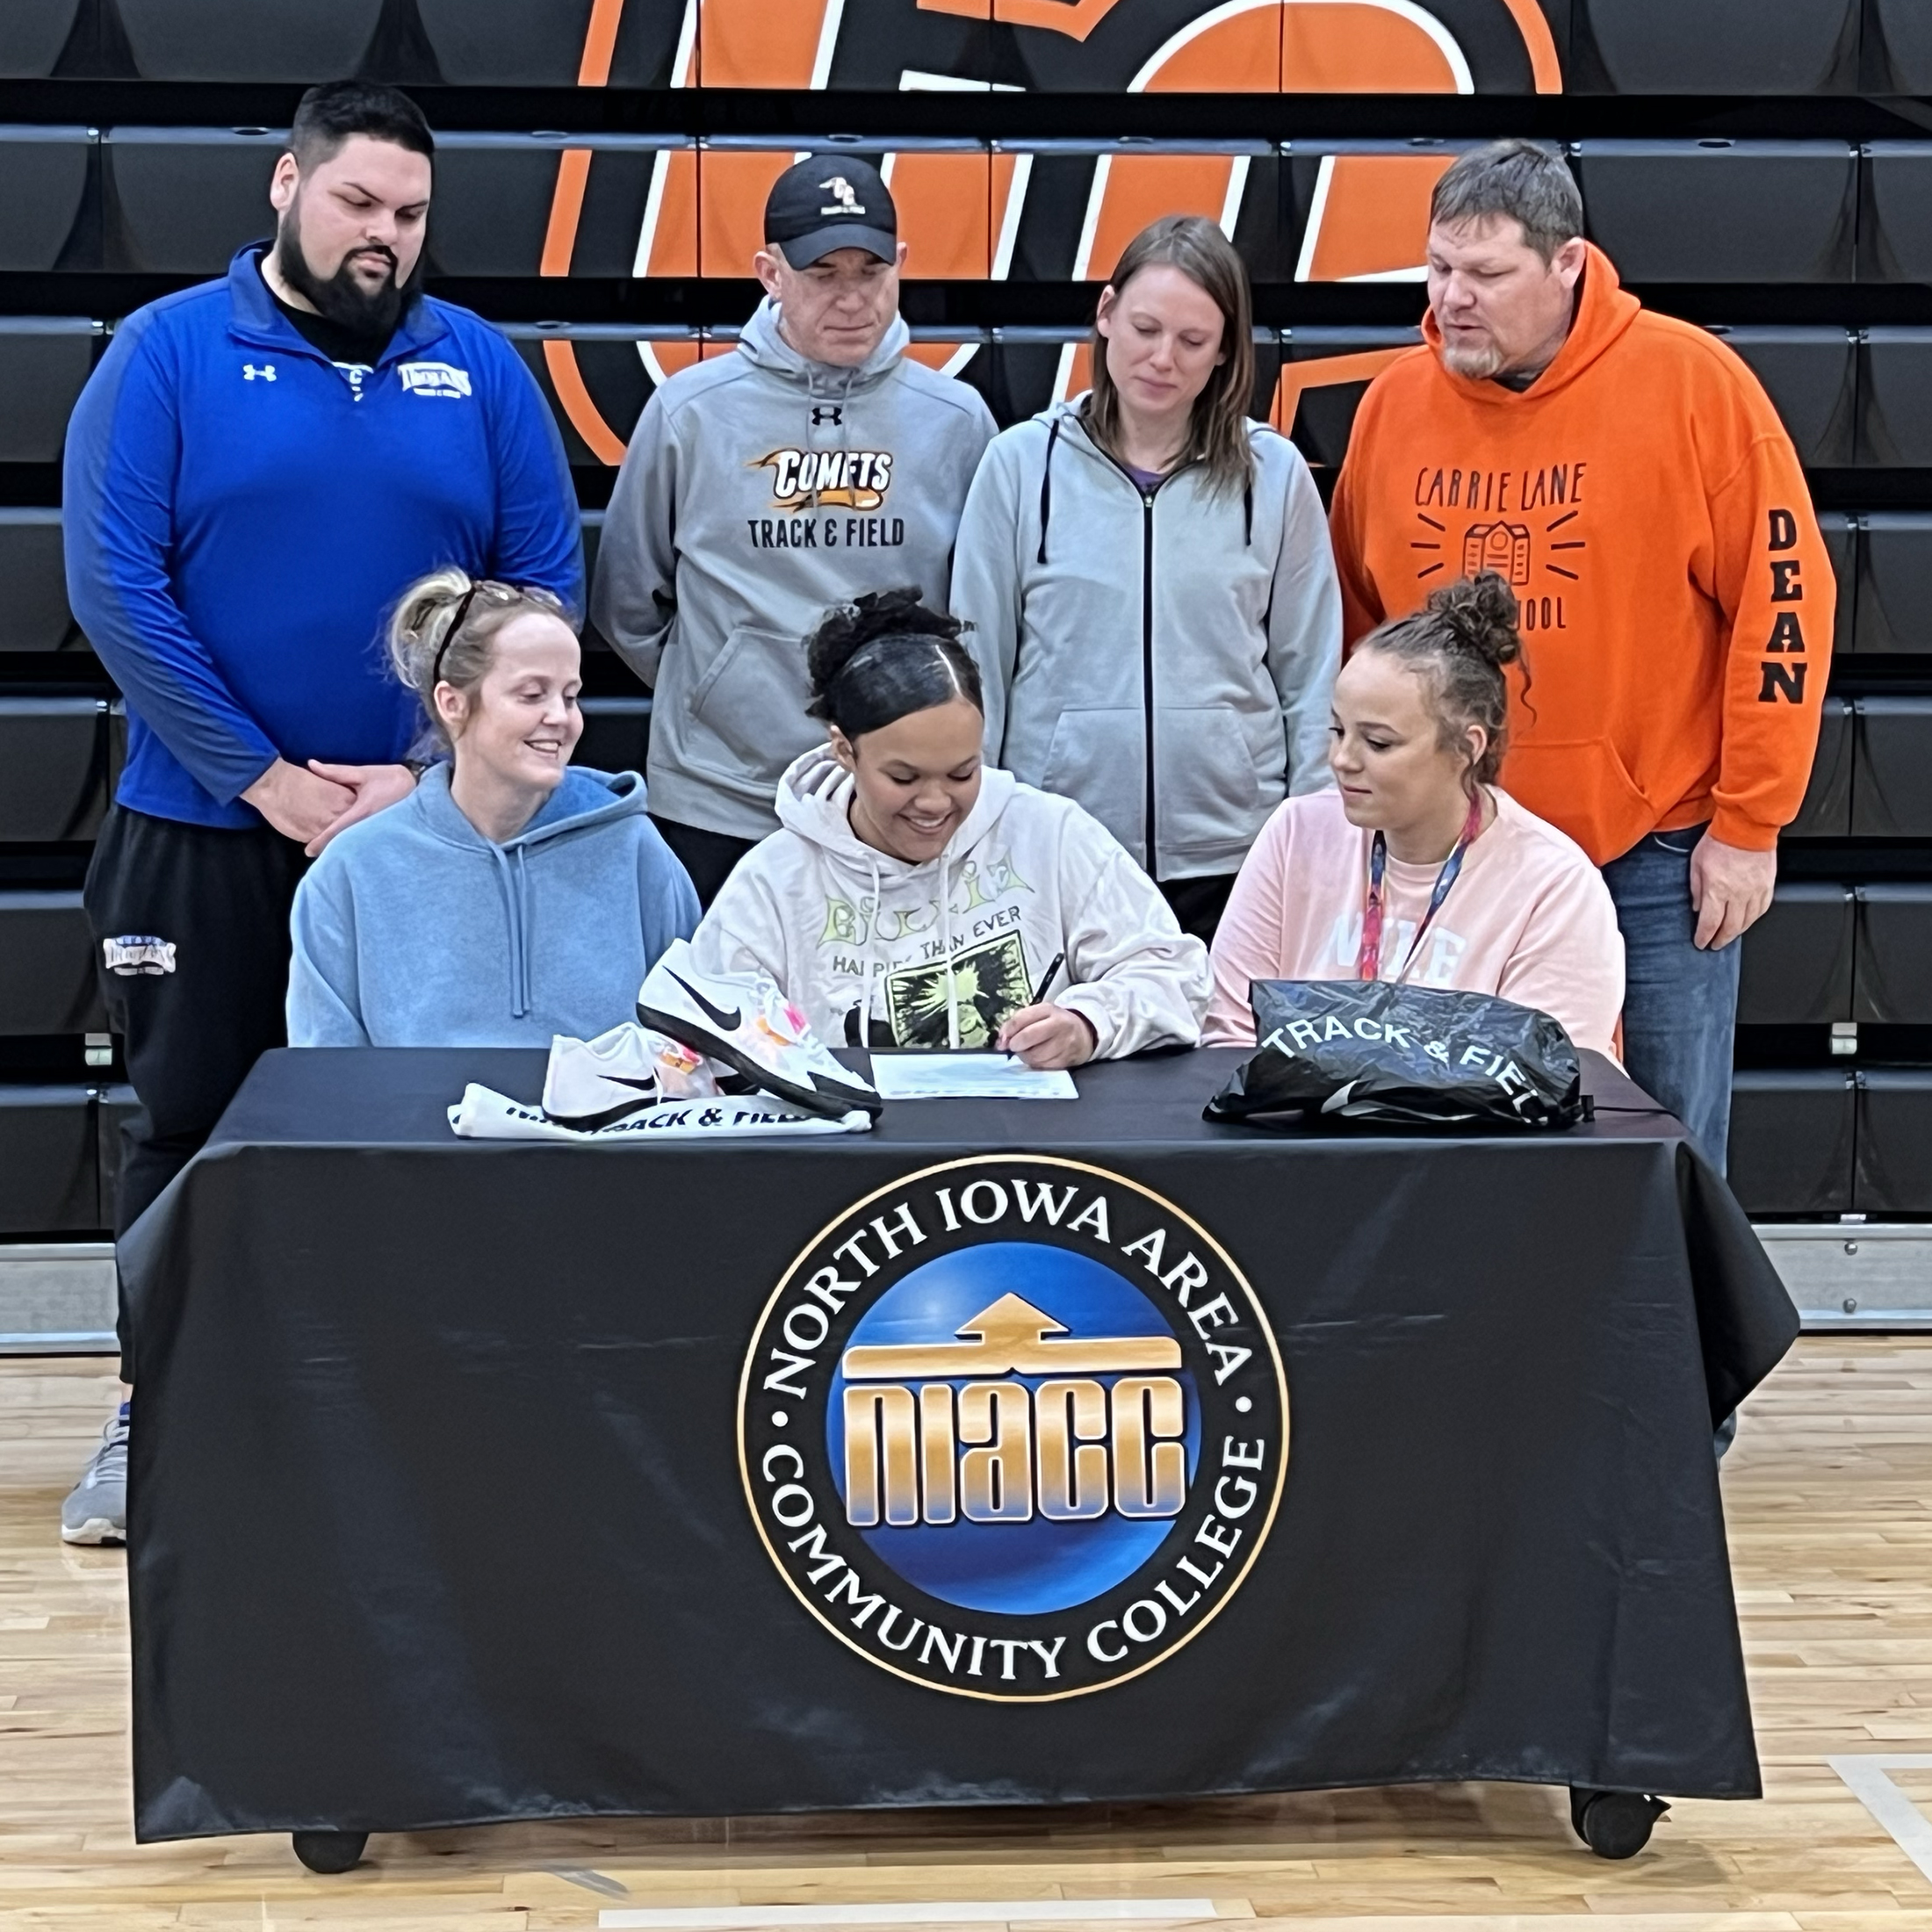 Paris Armstrong to throw for NIACC Trojans